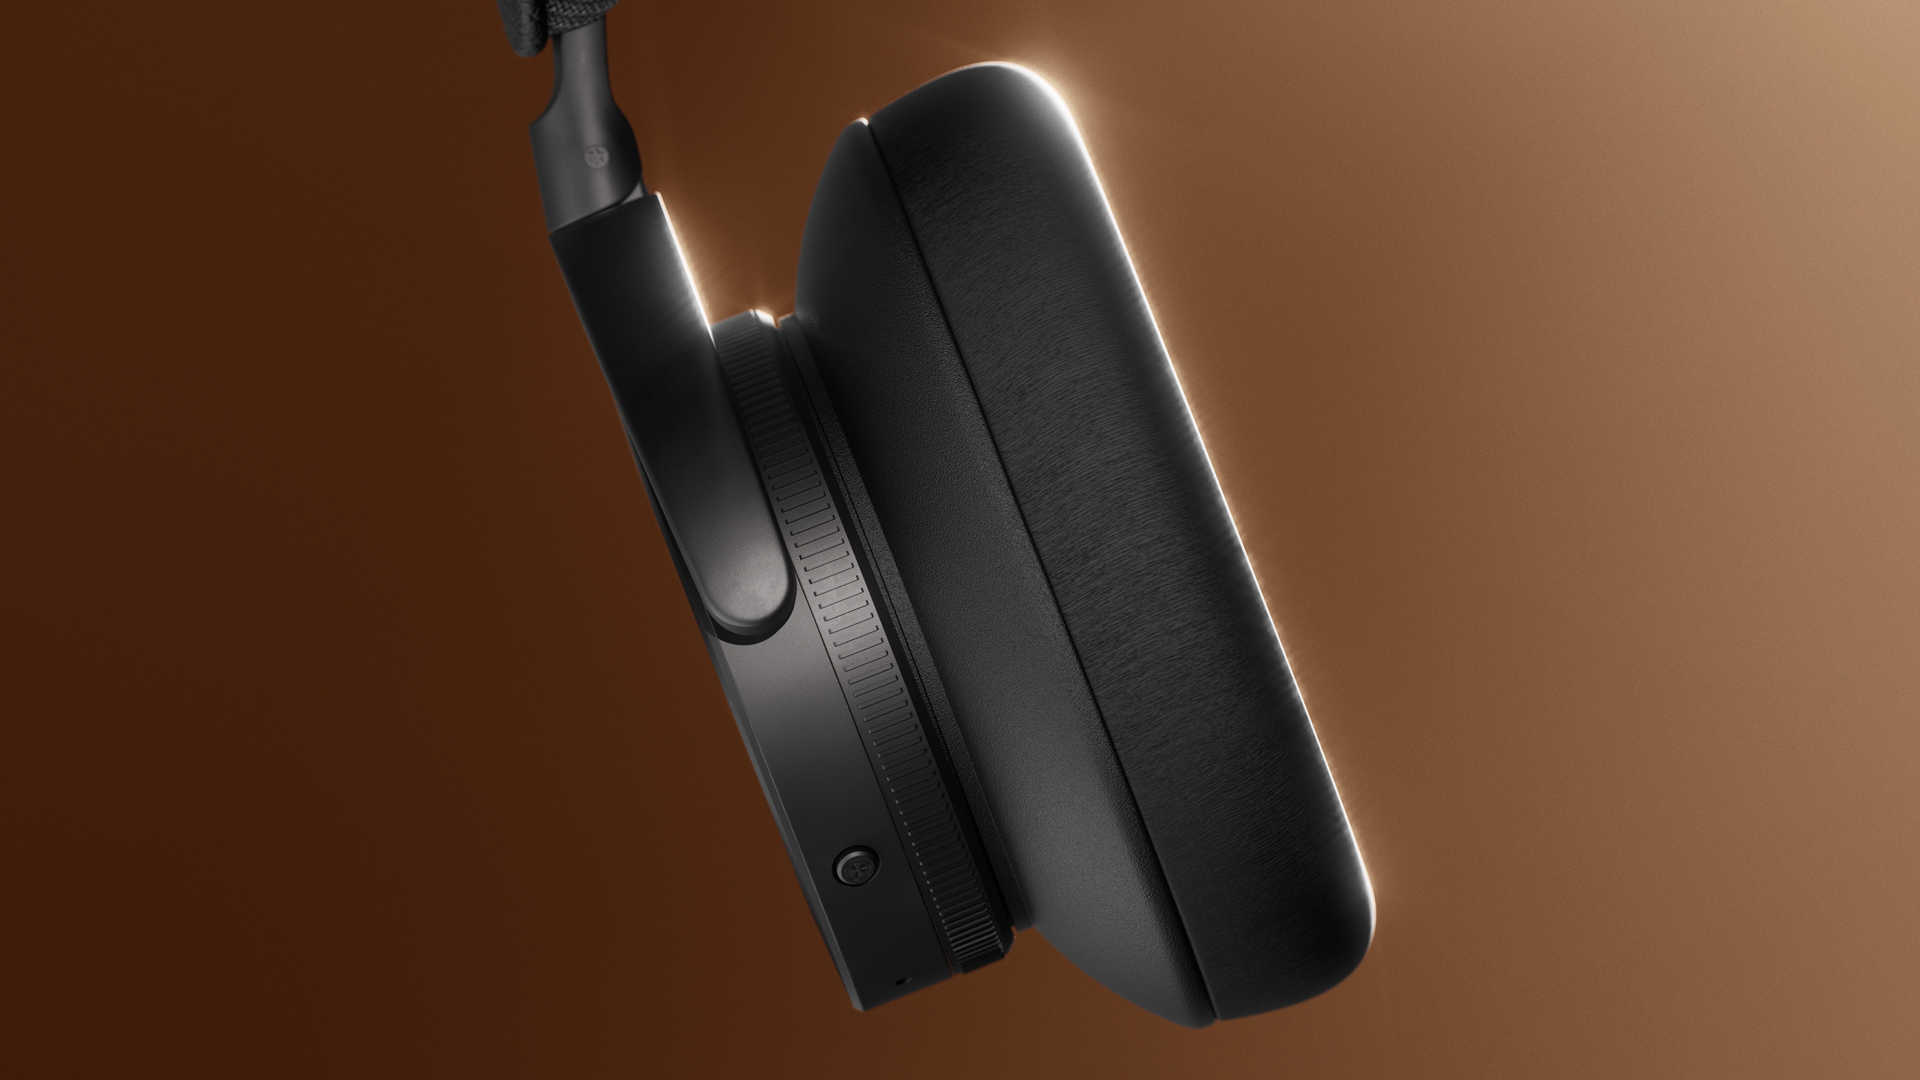 Beoplay H95 ANC headphones. Listening, redefined - B&O